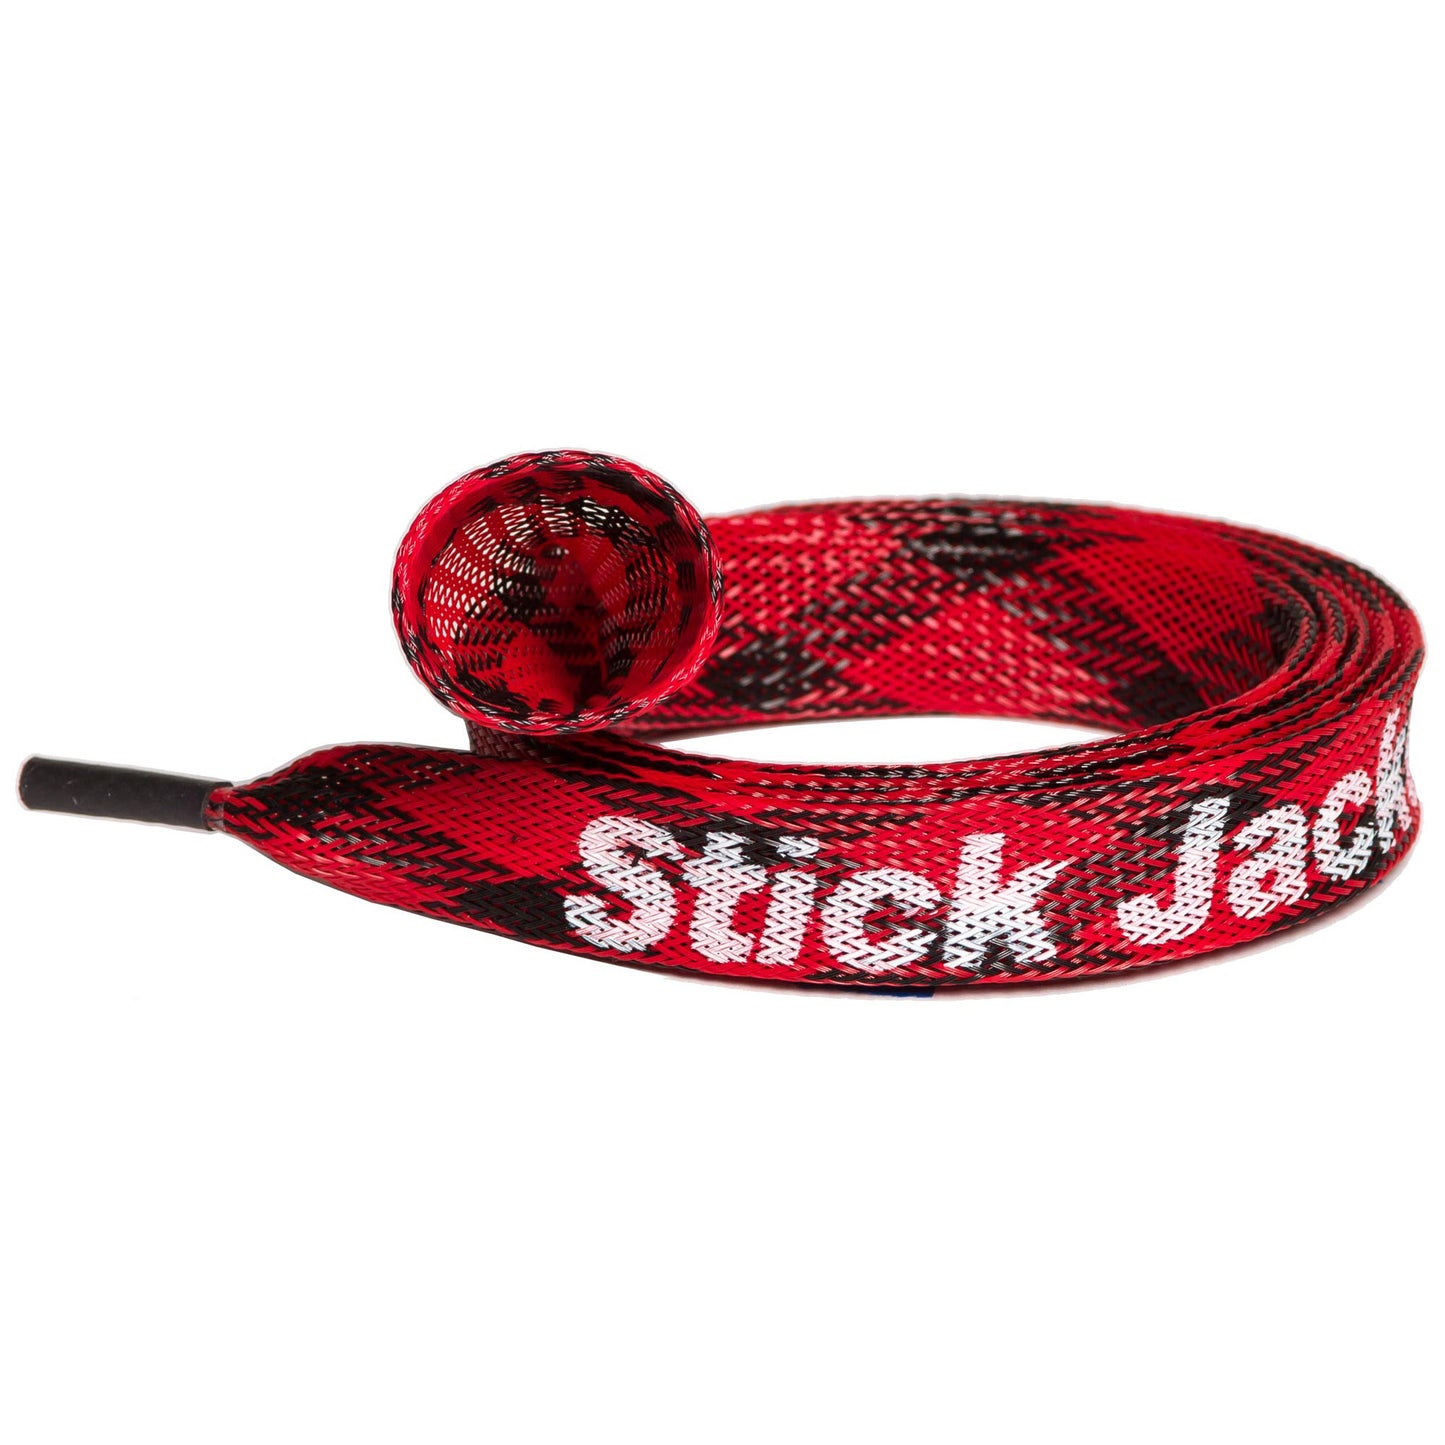 Red Shad LTD Casting Stick Jacket® Fishing Rod Cover For Rods up to 7-1/2'